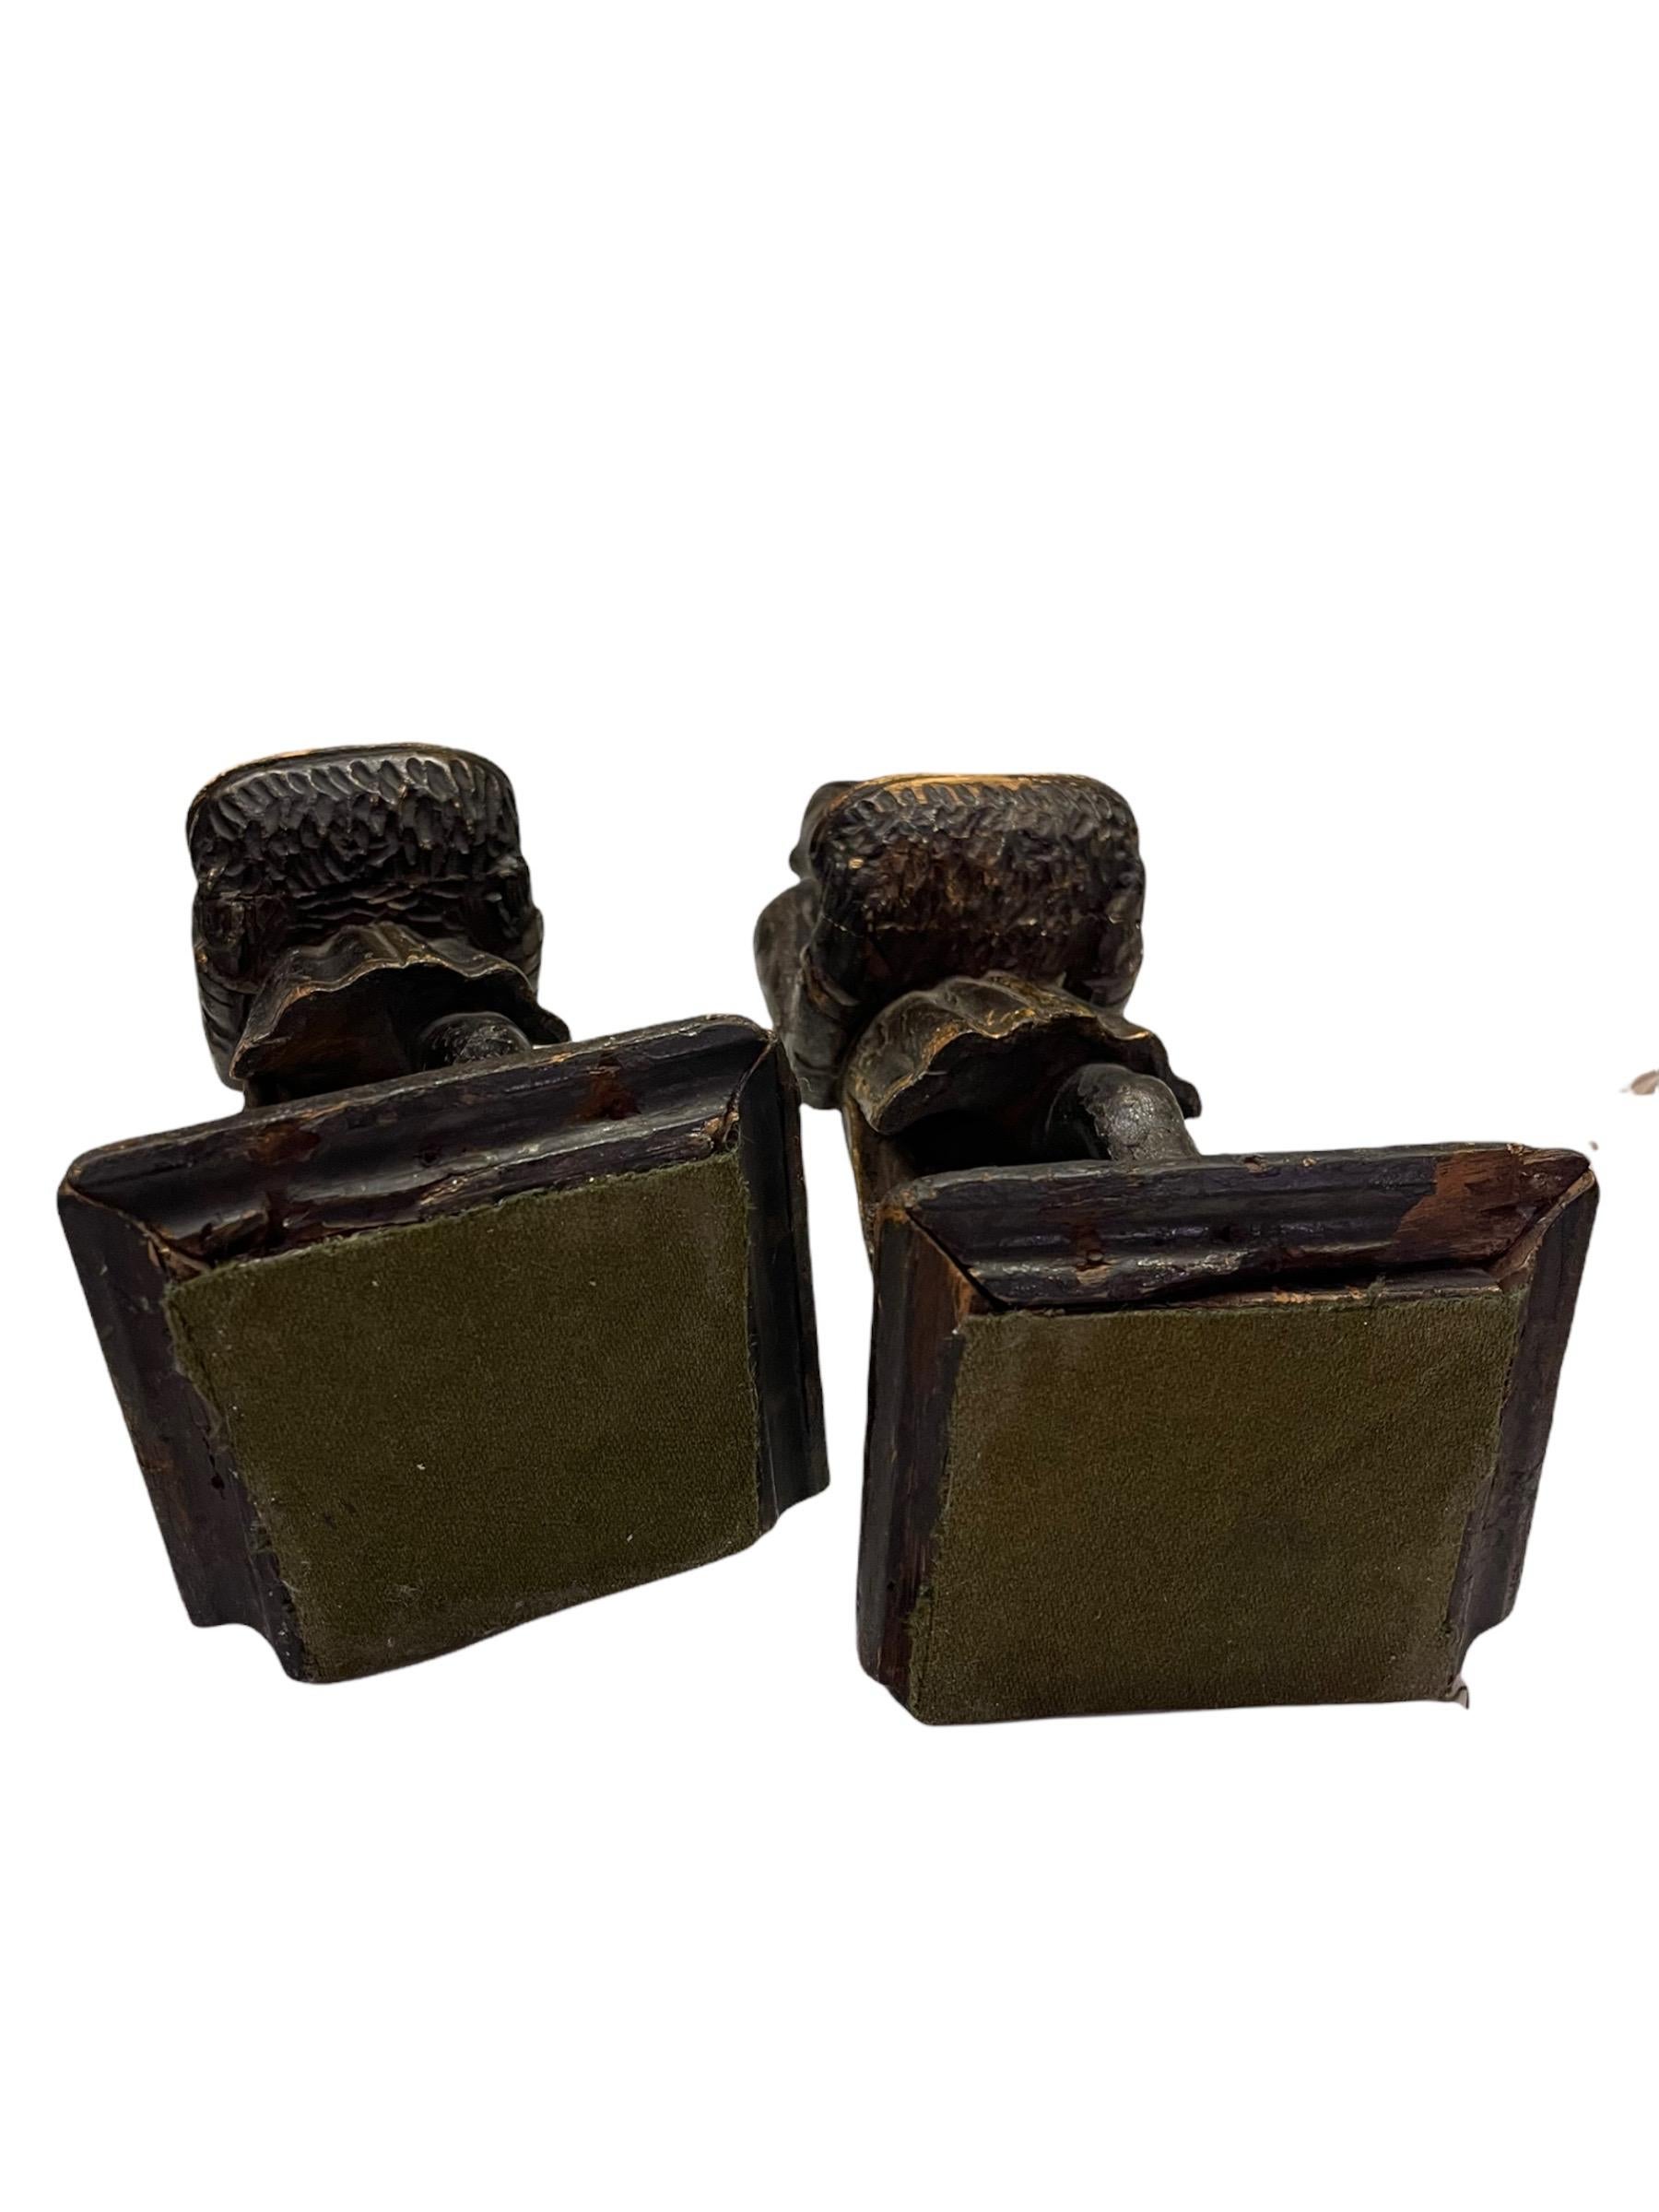 A Pair of 18th Century English Chinoiserie Carved Wood Ring Holders  For Sale 9